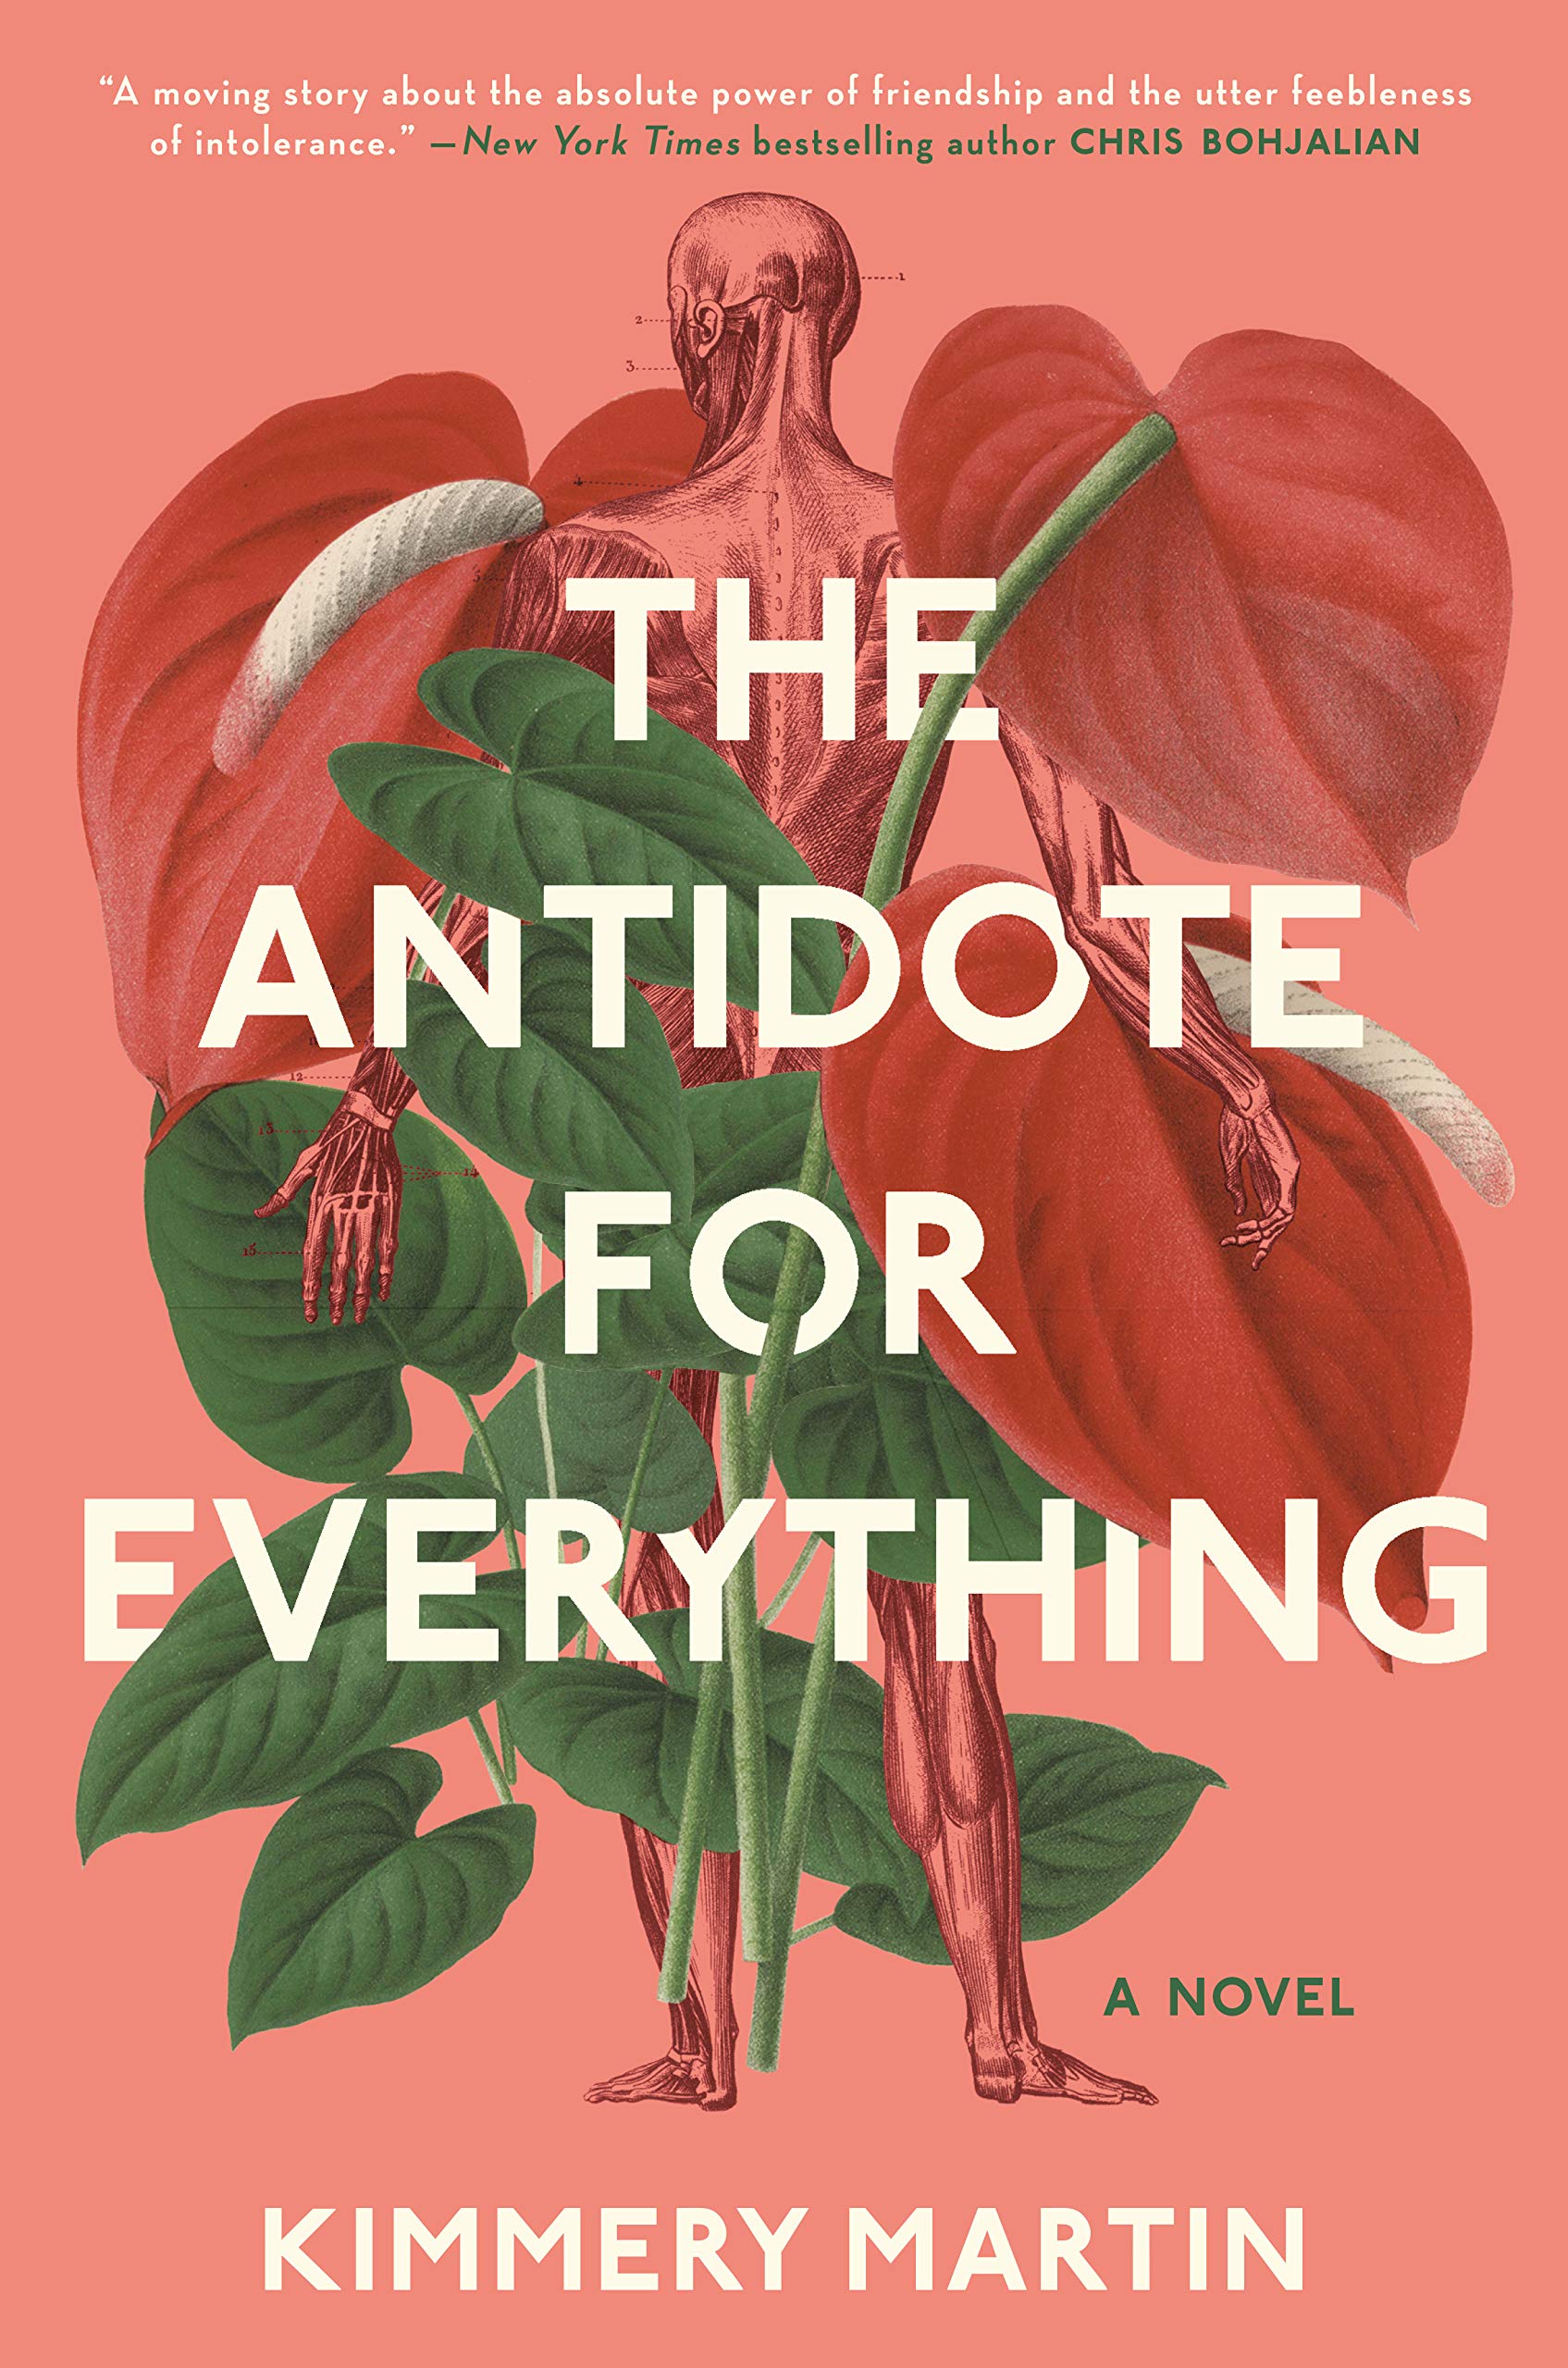 The Antidote for Everything by Kimmery Martin